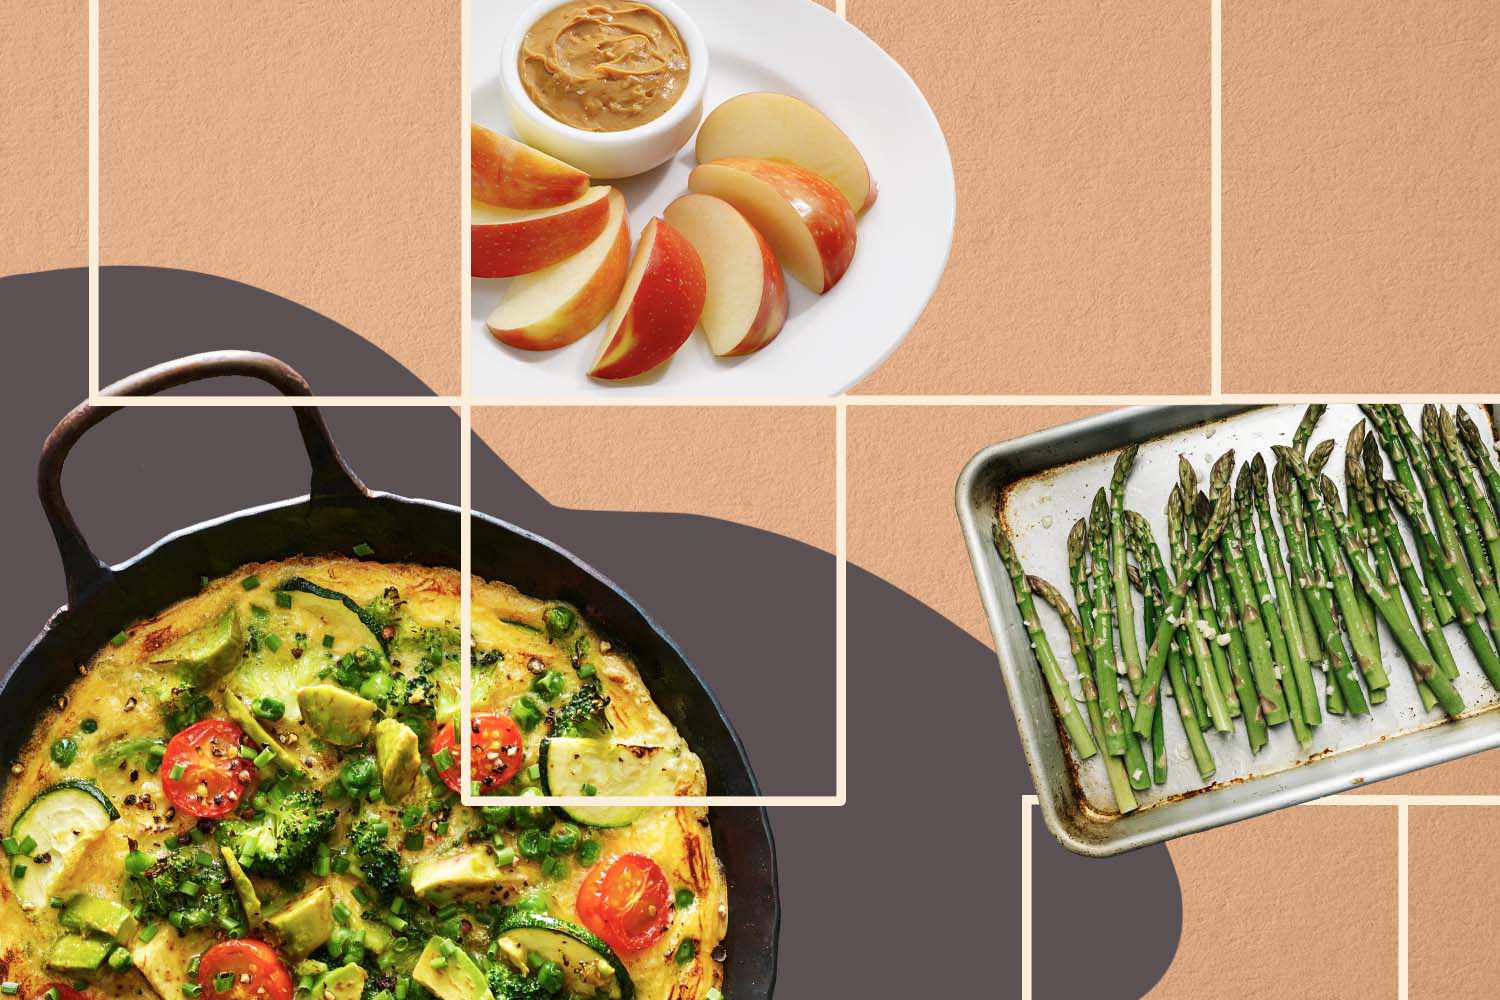 Gluten-Free Meal Plan including frittata, peanut butter, and asparagus